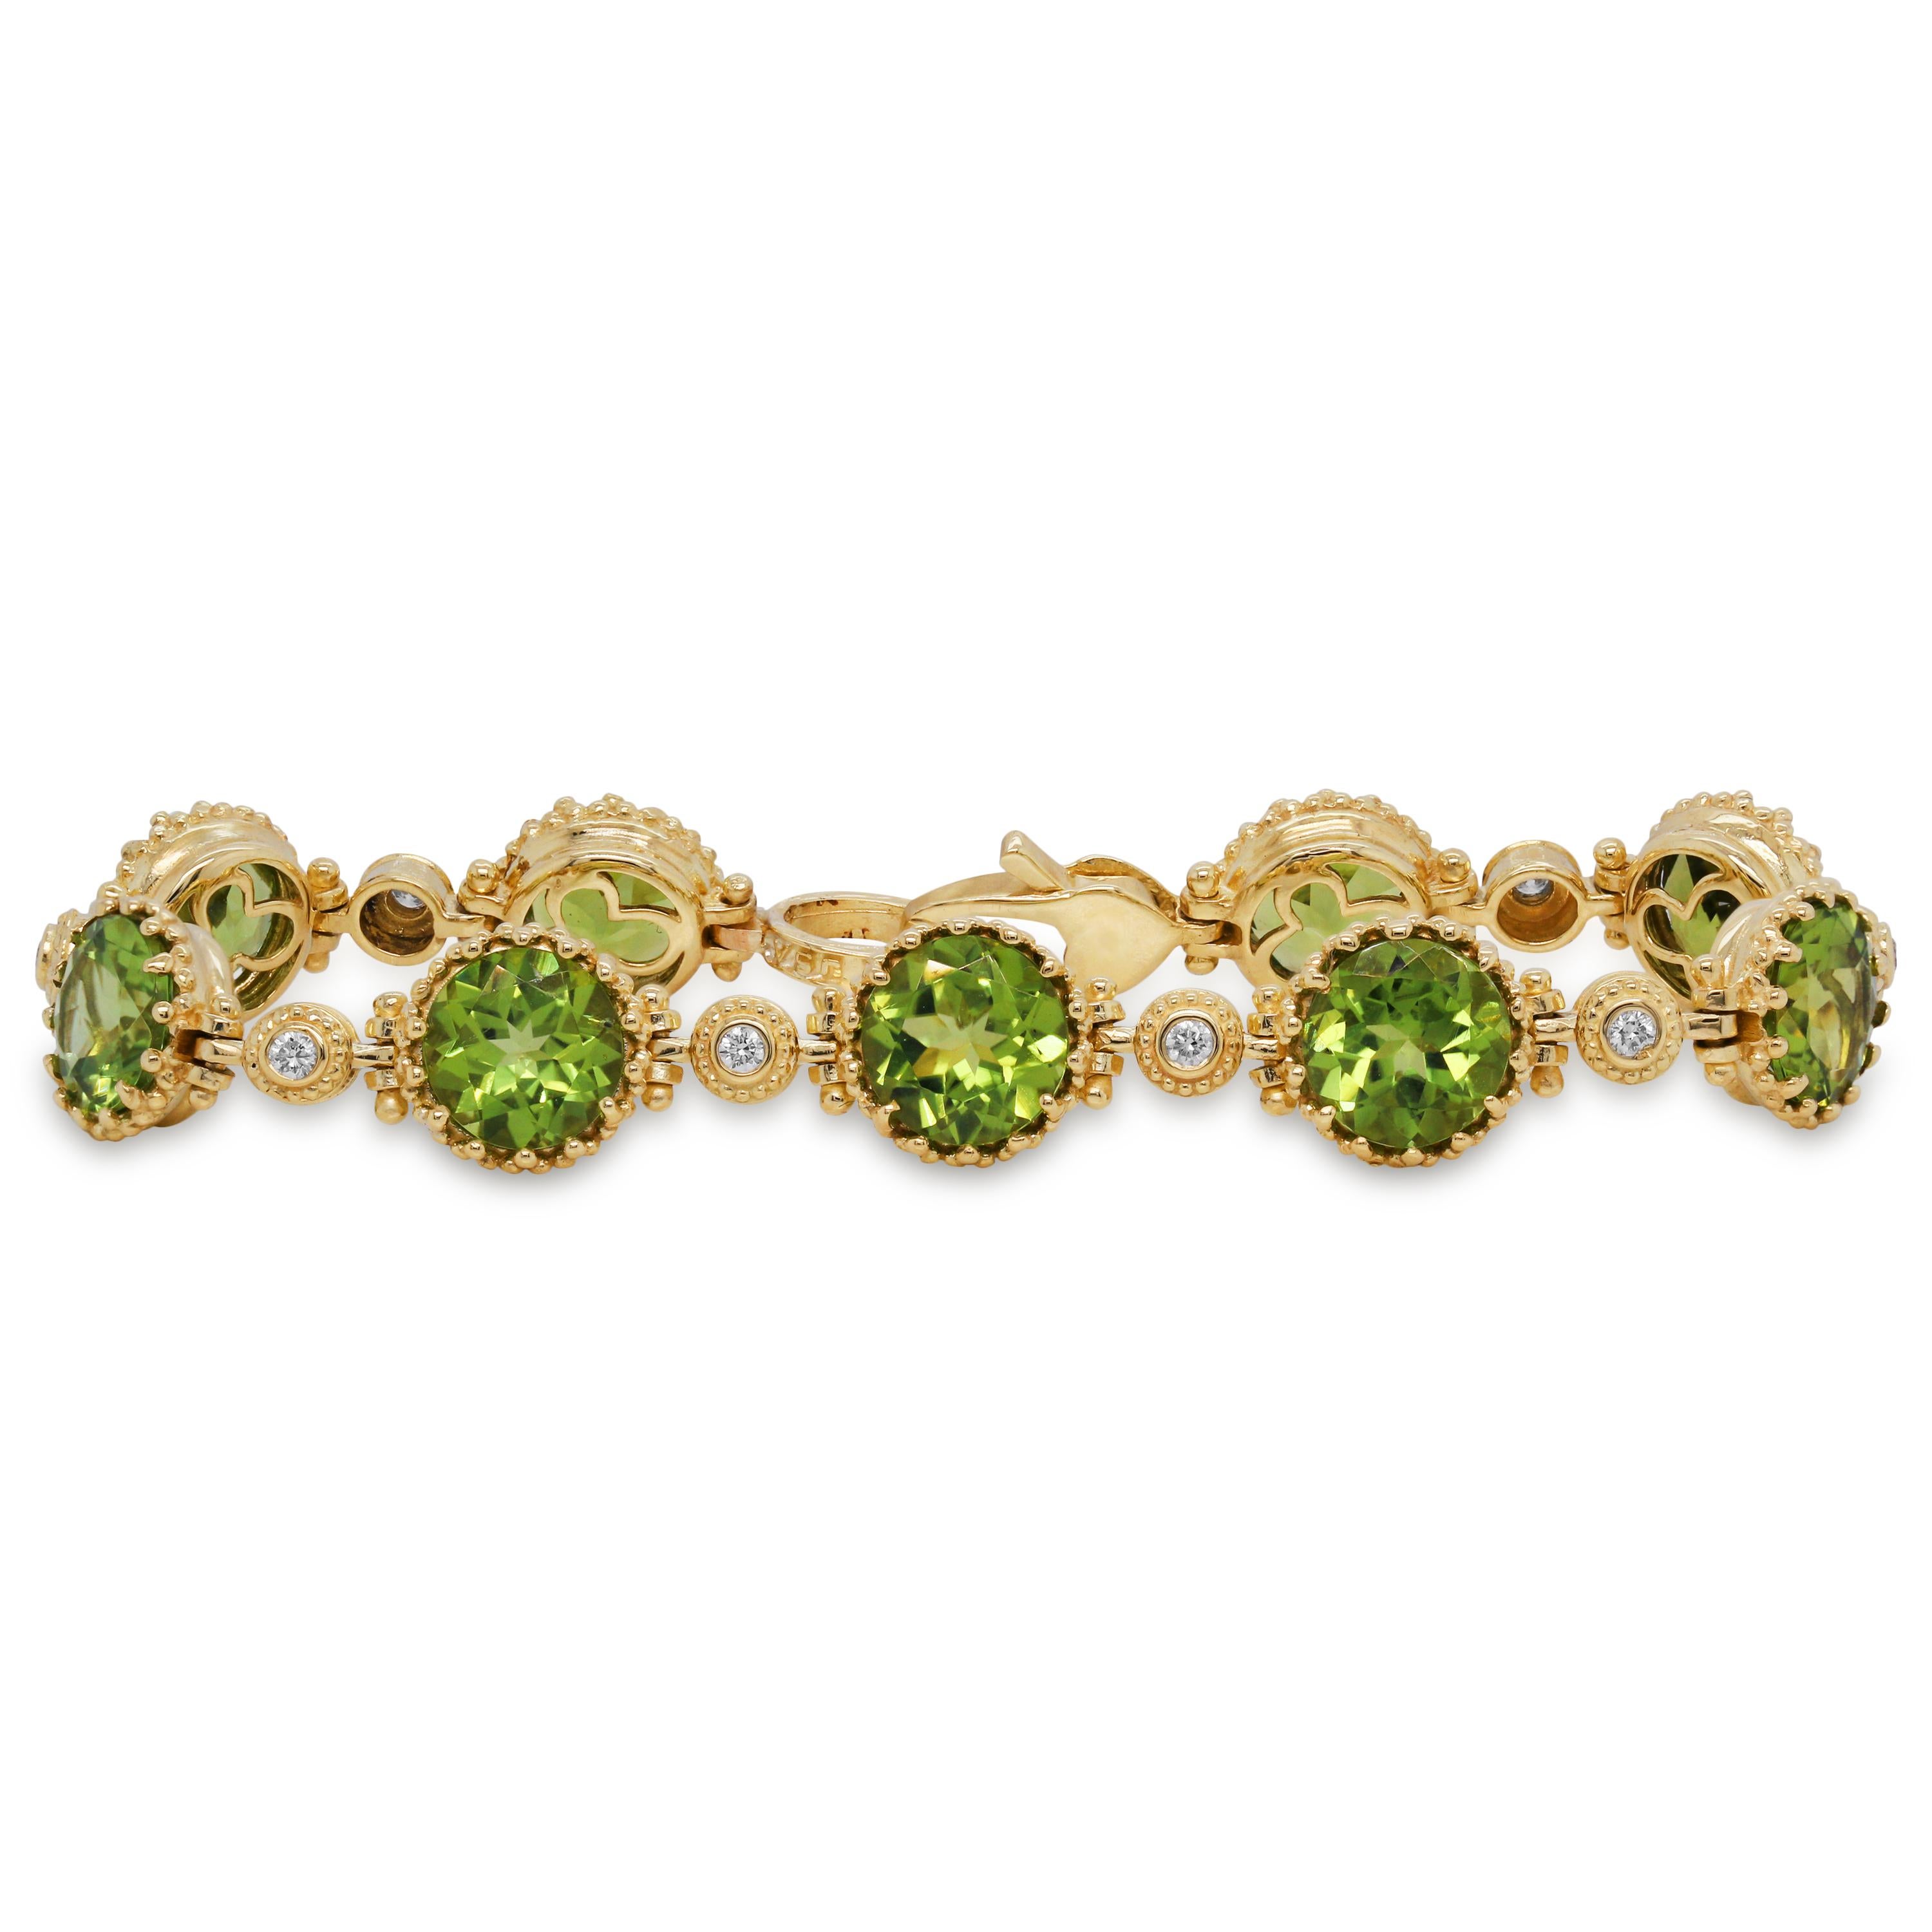 Stambolian 18 Karat Yellow Gold Diamond Round Cut Peridot Tennis Bracelet

NO RESERVE PRICE
ONE OF A KIND

This incredible bracelet features nine, top-quality, round-cut Peridot with diamonds bezel set in between each section.

Apprx. 25 carat